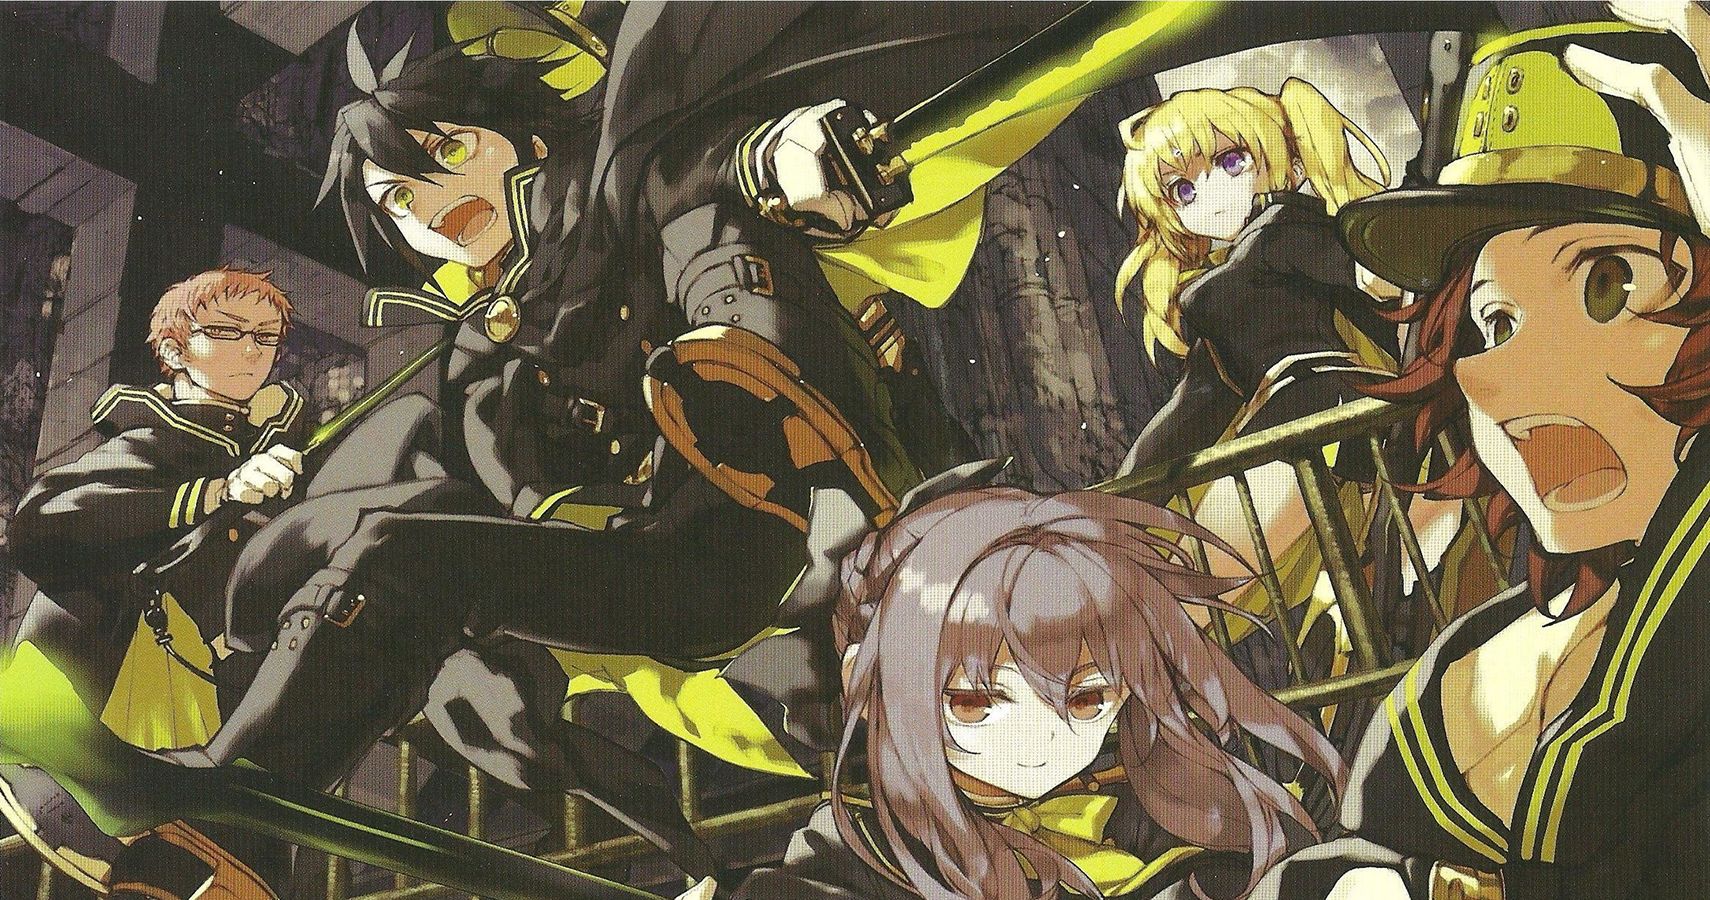 Seraph Of The End: 10 Things We Want To See In Season 3